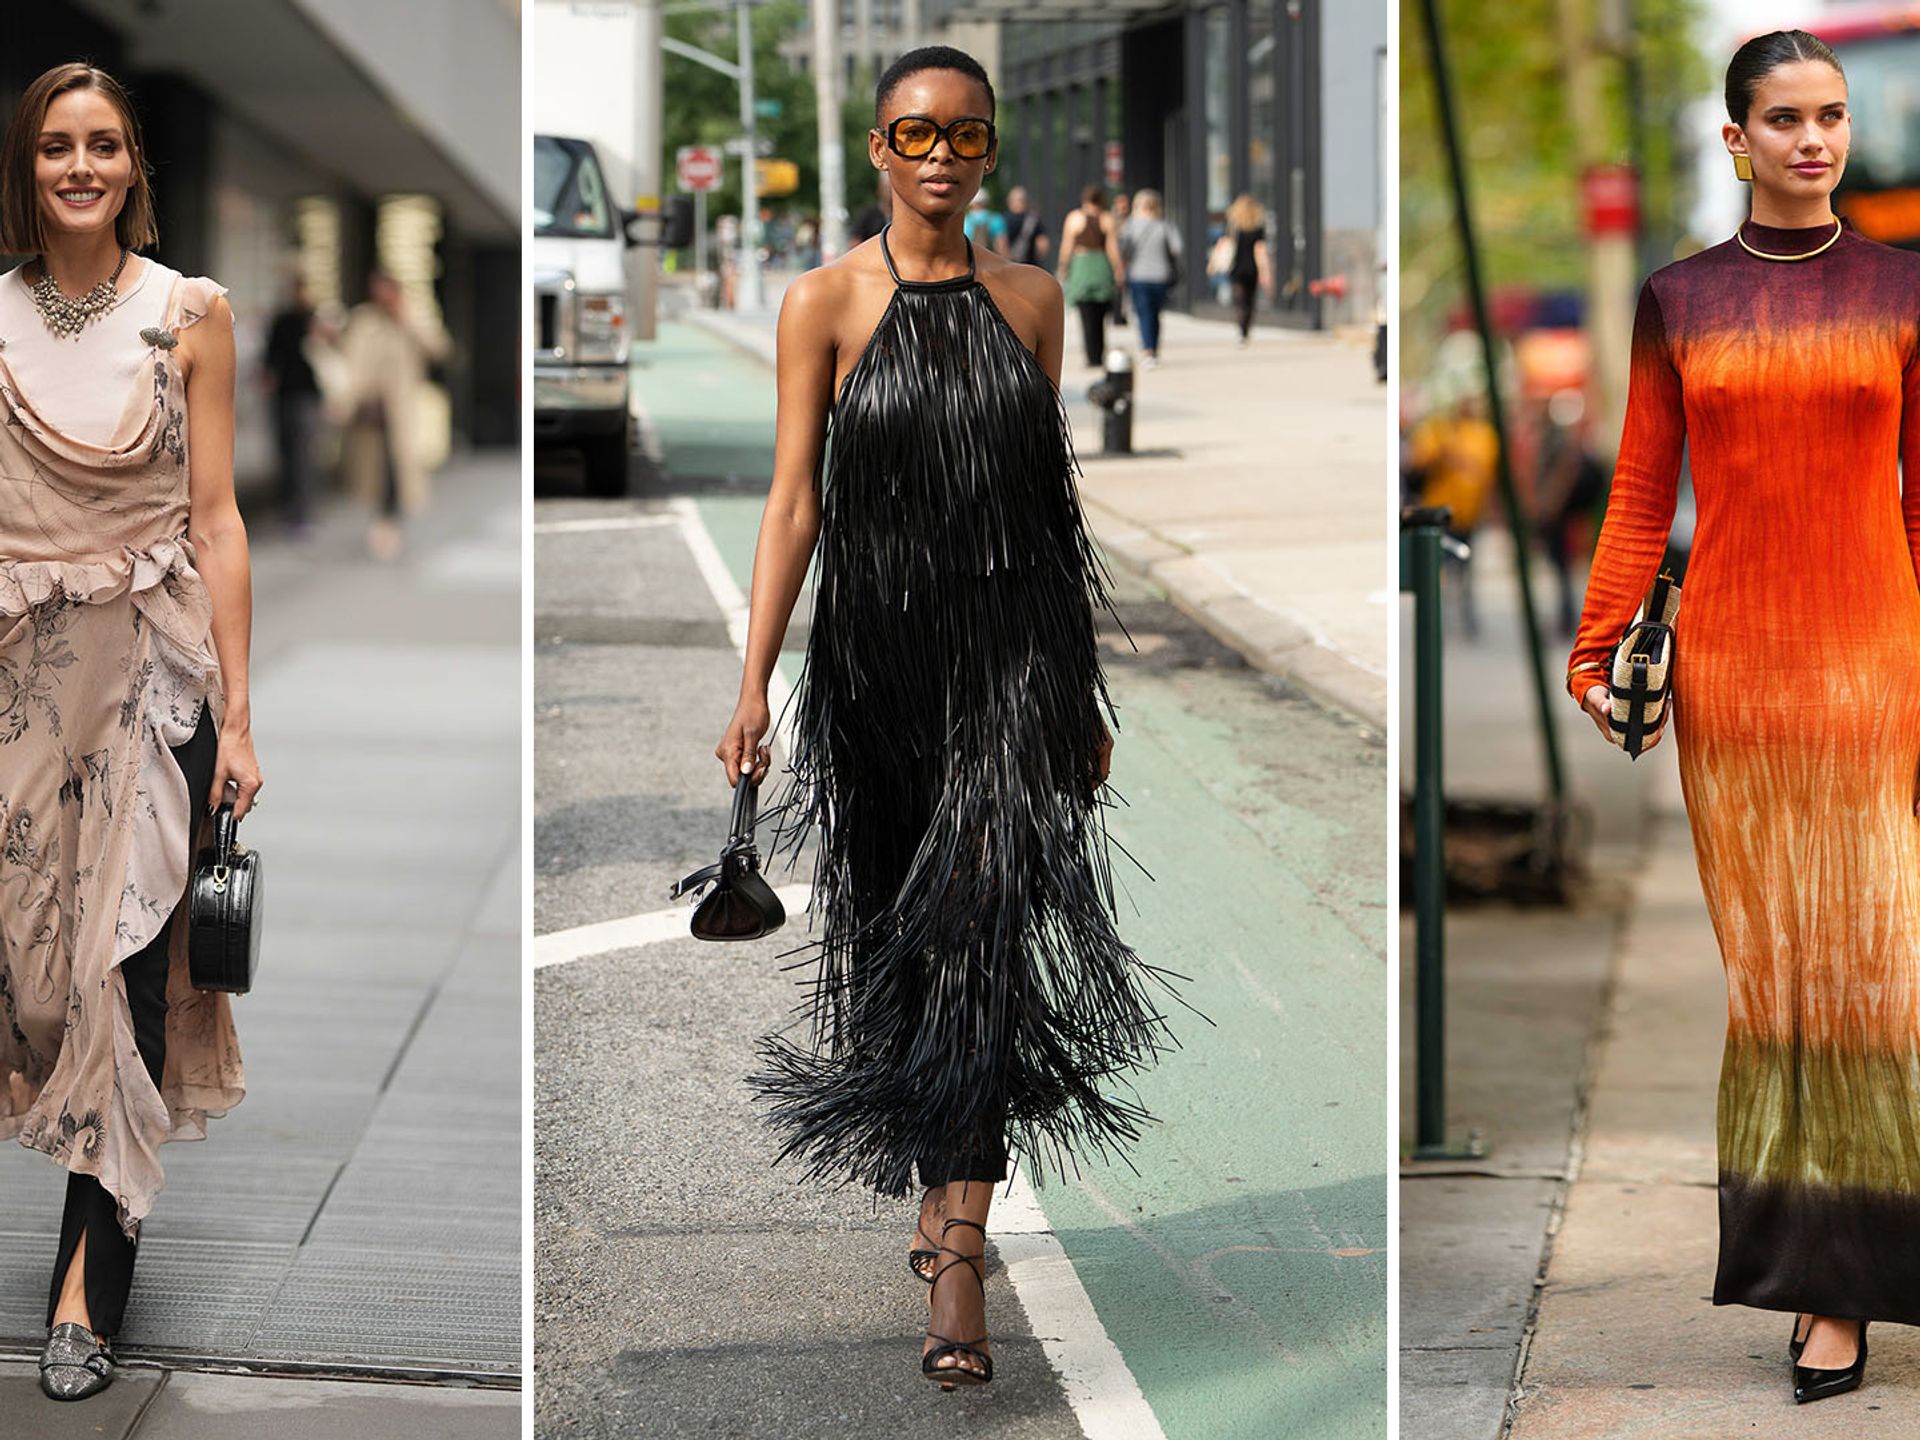 From the Runway to StreetStyle: Shades of Green